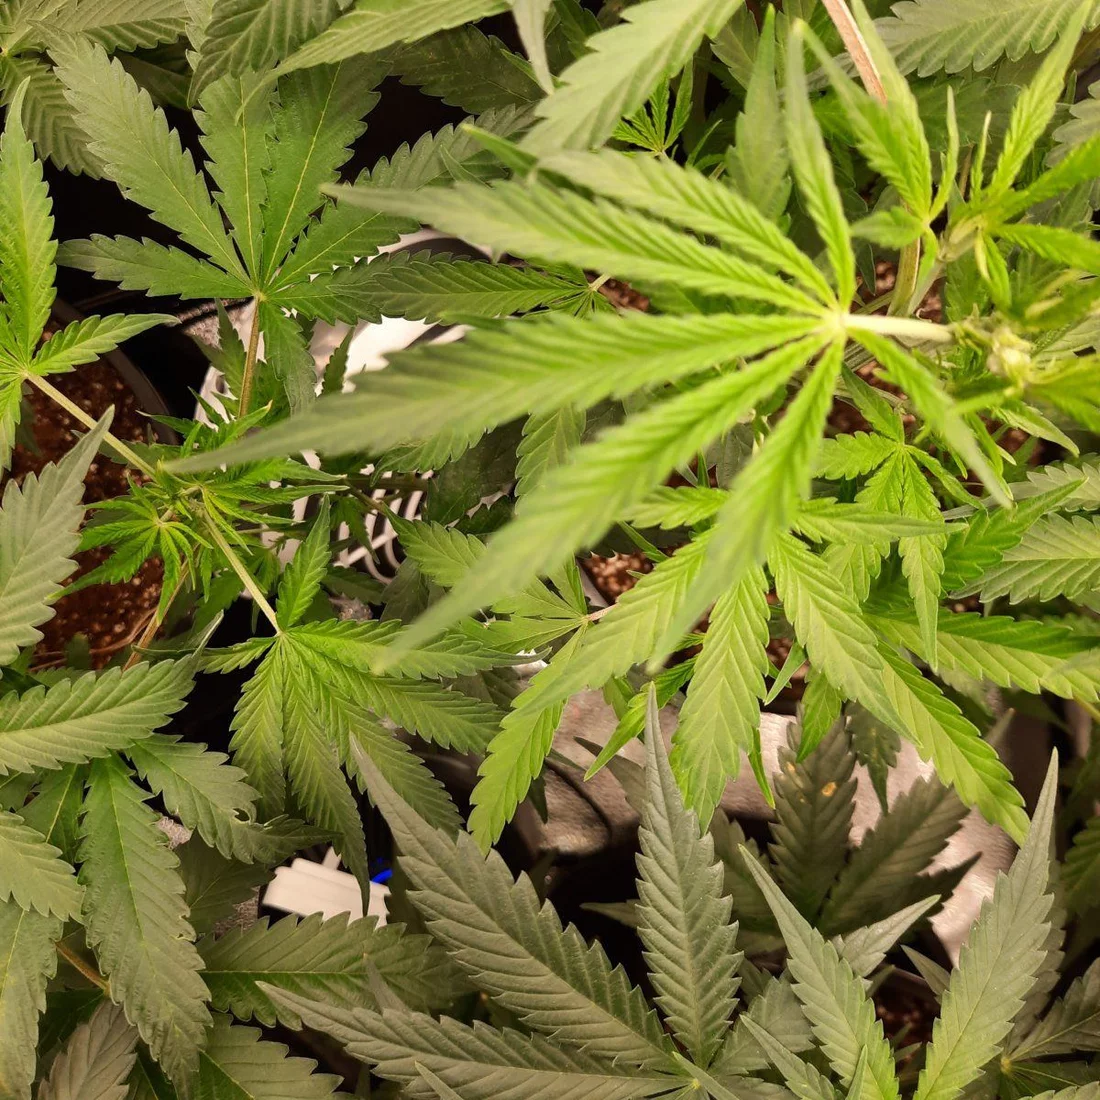 First time grow slight yellowing tips on new growth weird browning of some bottom leaves dry 